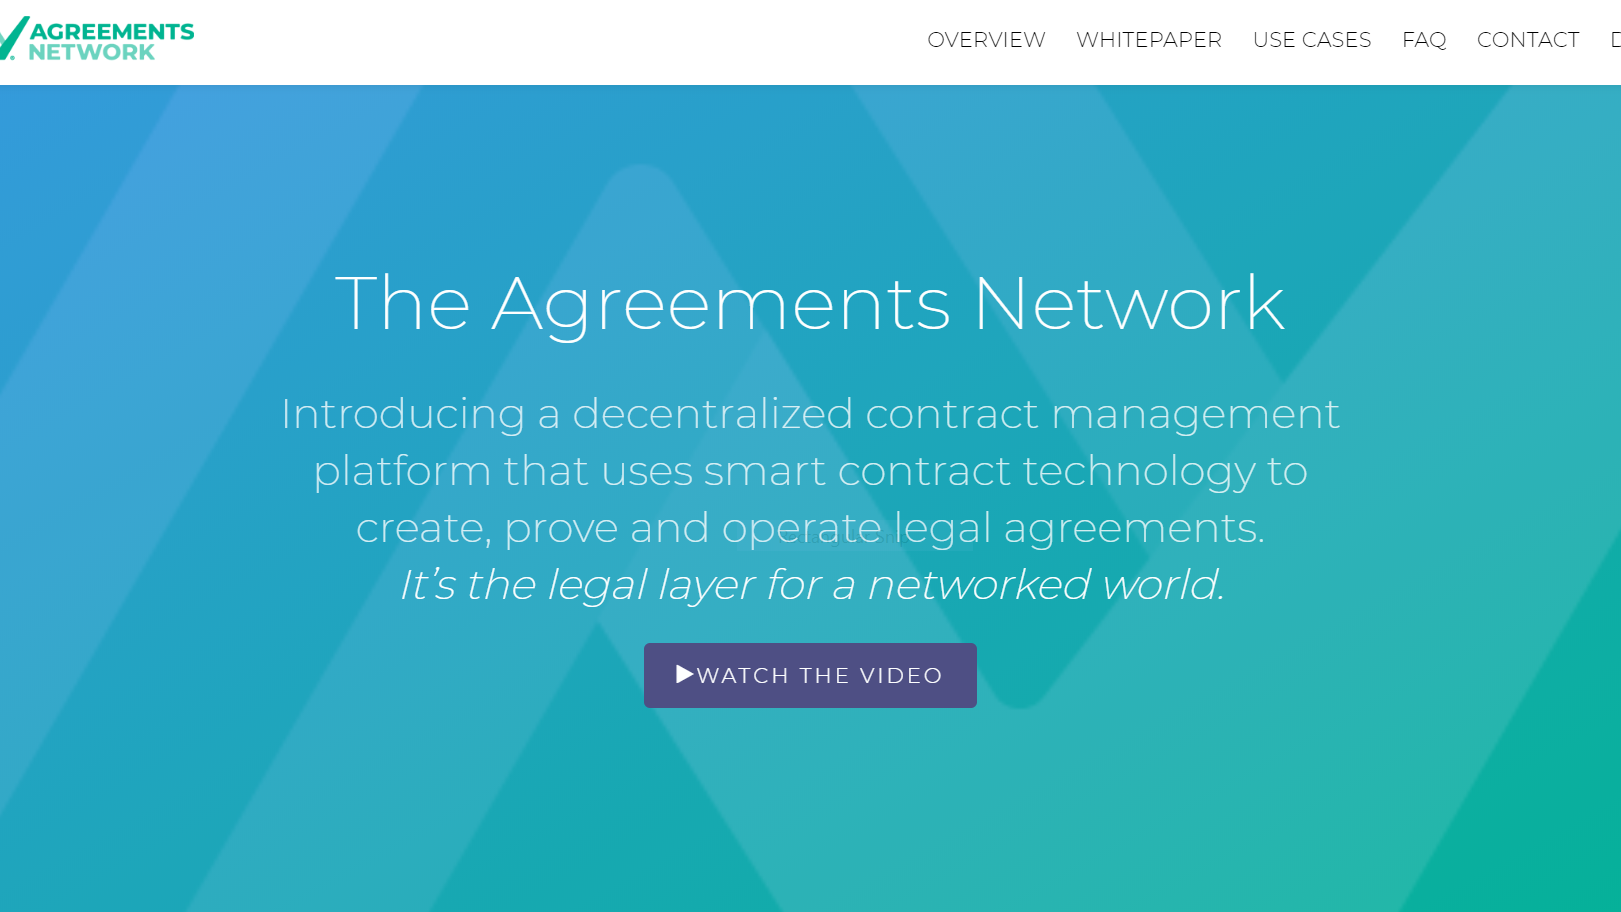 Law Firms, Tech Companies, Join Forces to Help Launch Blockchain-Based Smart Contracts Platform